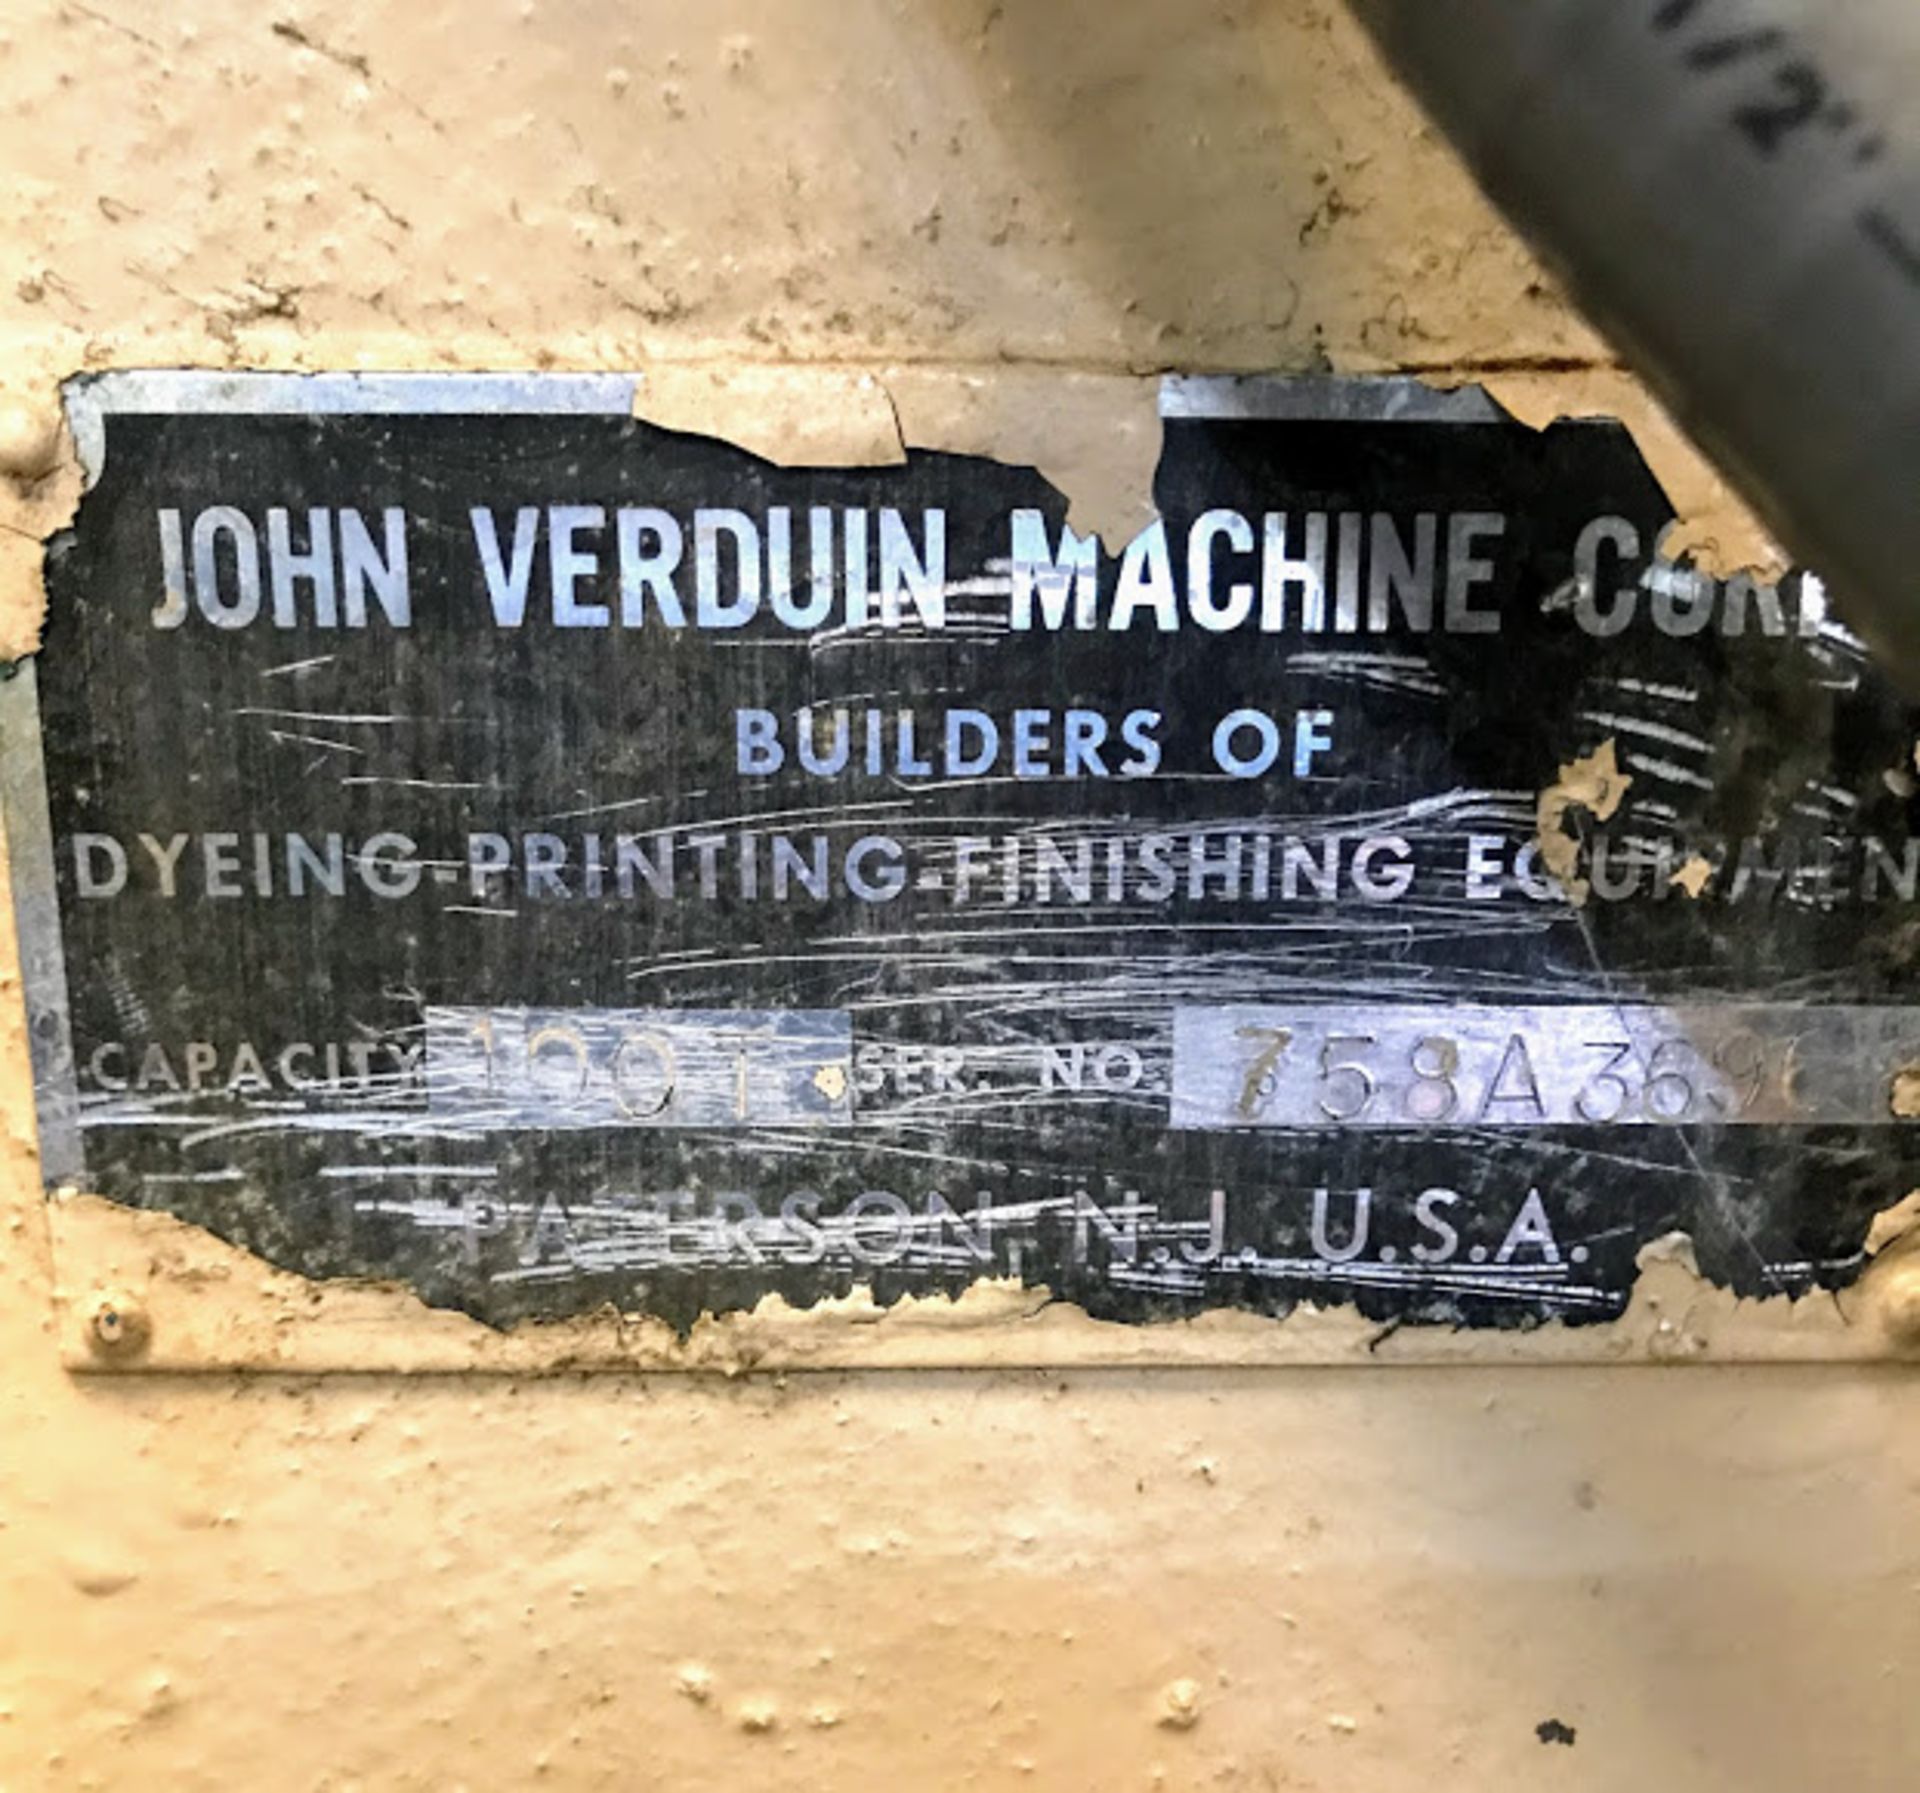 John Verduin Dying Printing Finishing Machine, Model# Calender, Serial# 758A3696, Rigging Fee $250 - Image 15 of 20